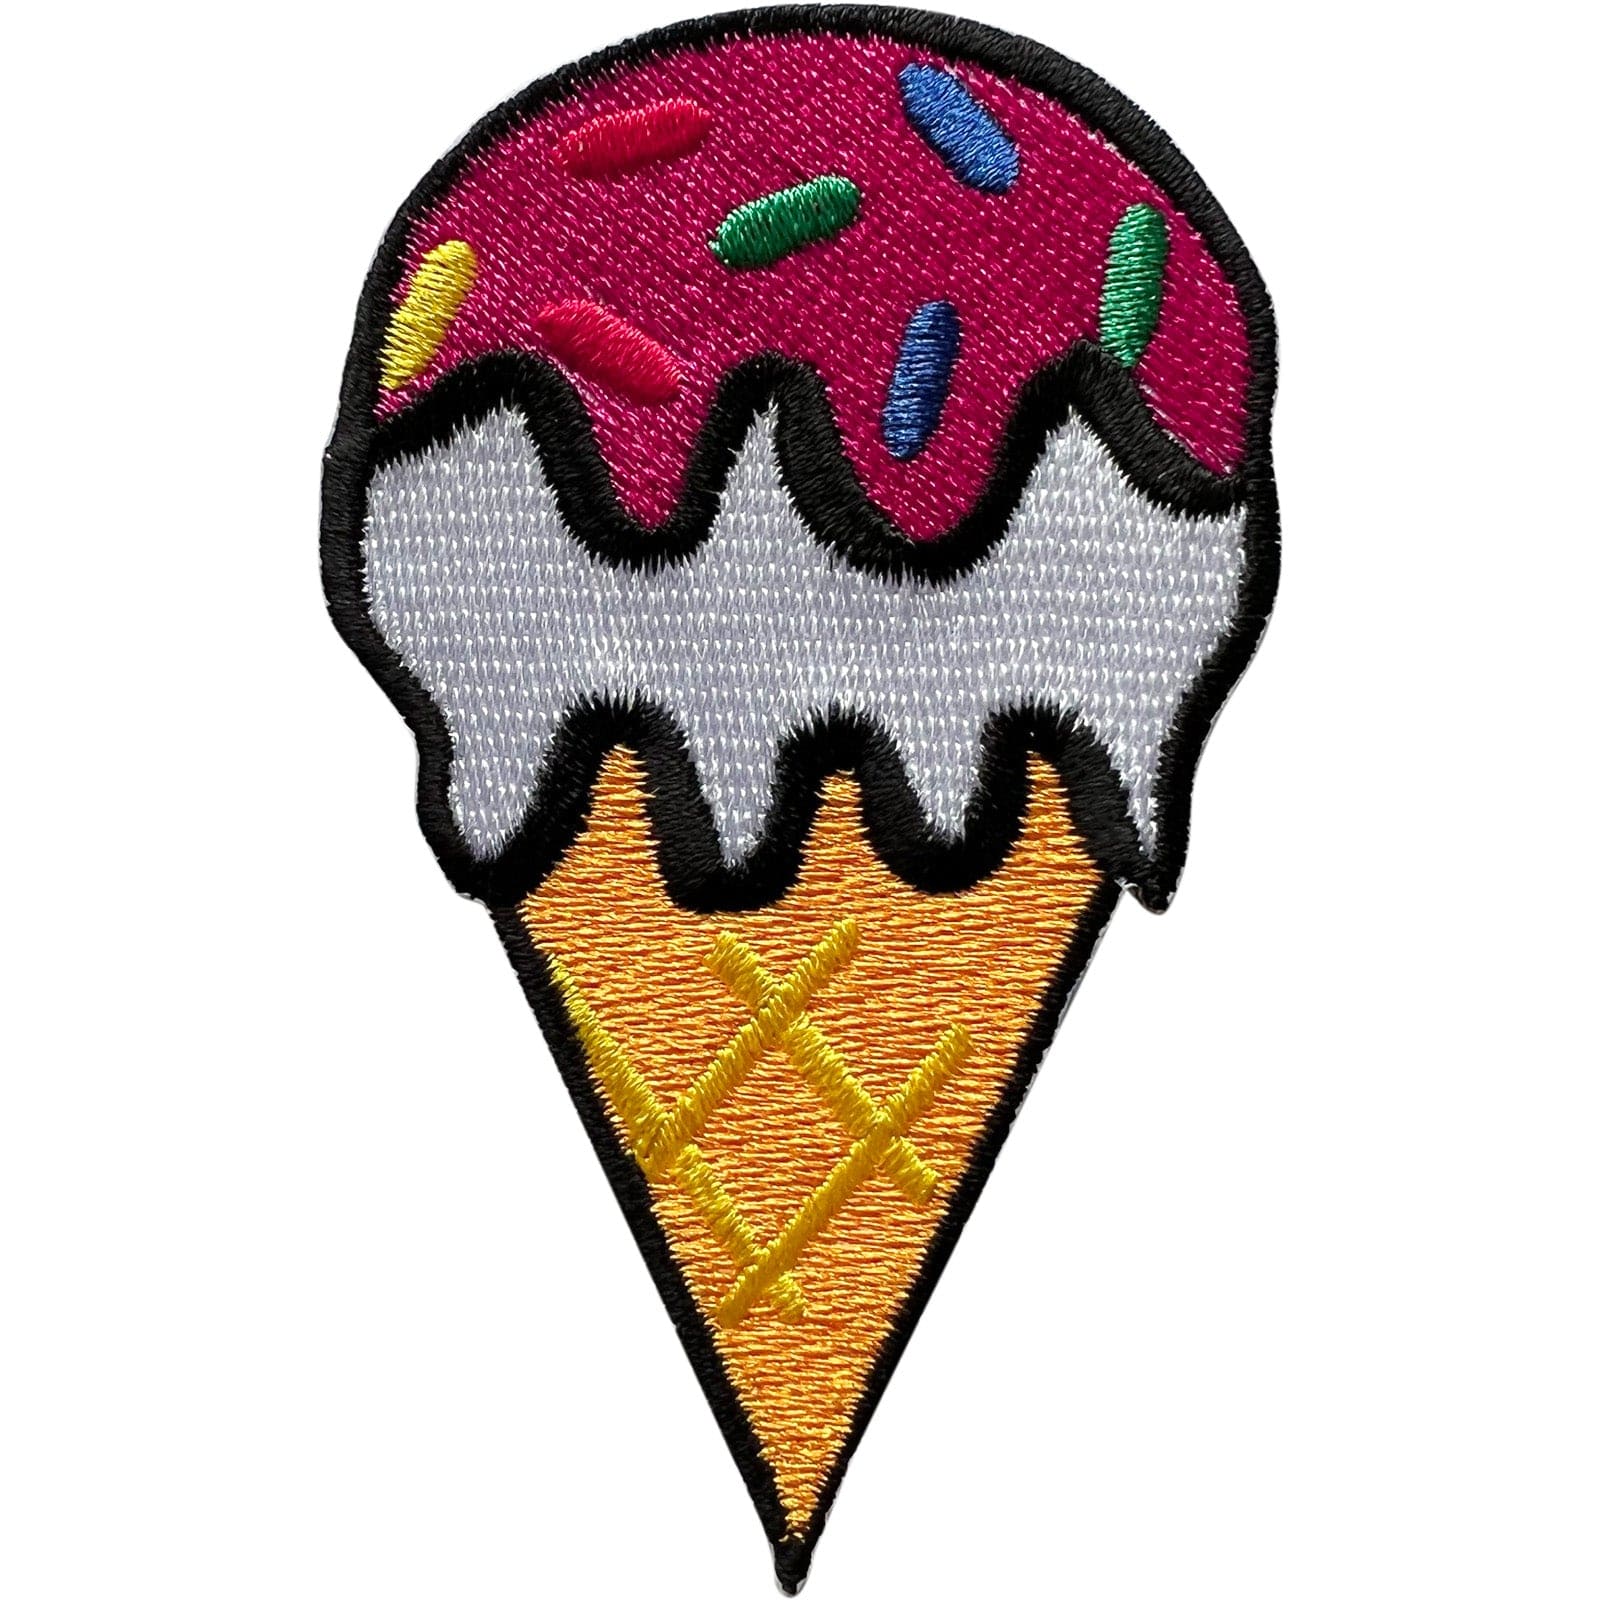 Ice Cream Cone Patch Iron On Sew On Clothes Bag Jeans Fabric Embroidery Applique